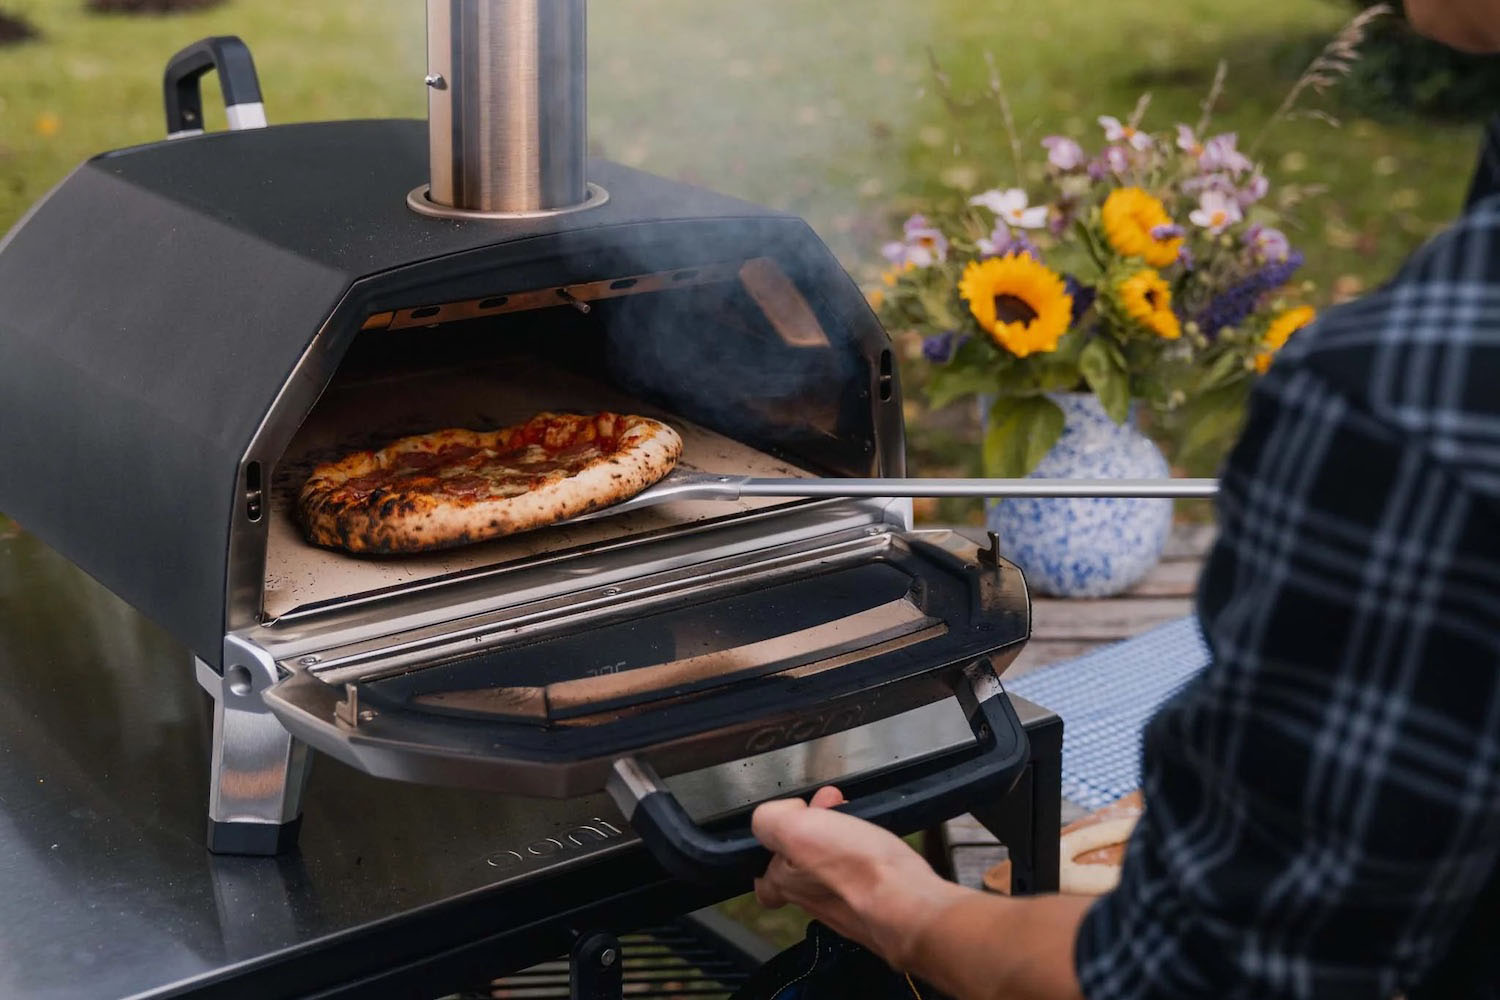 Ooni is having a massive flash sale with 20% off pizza ovens